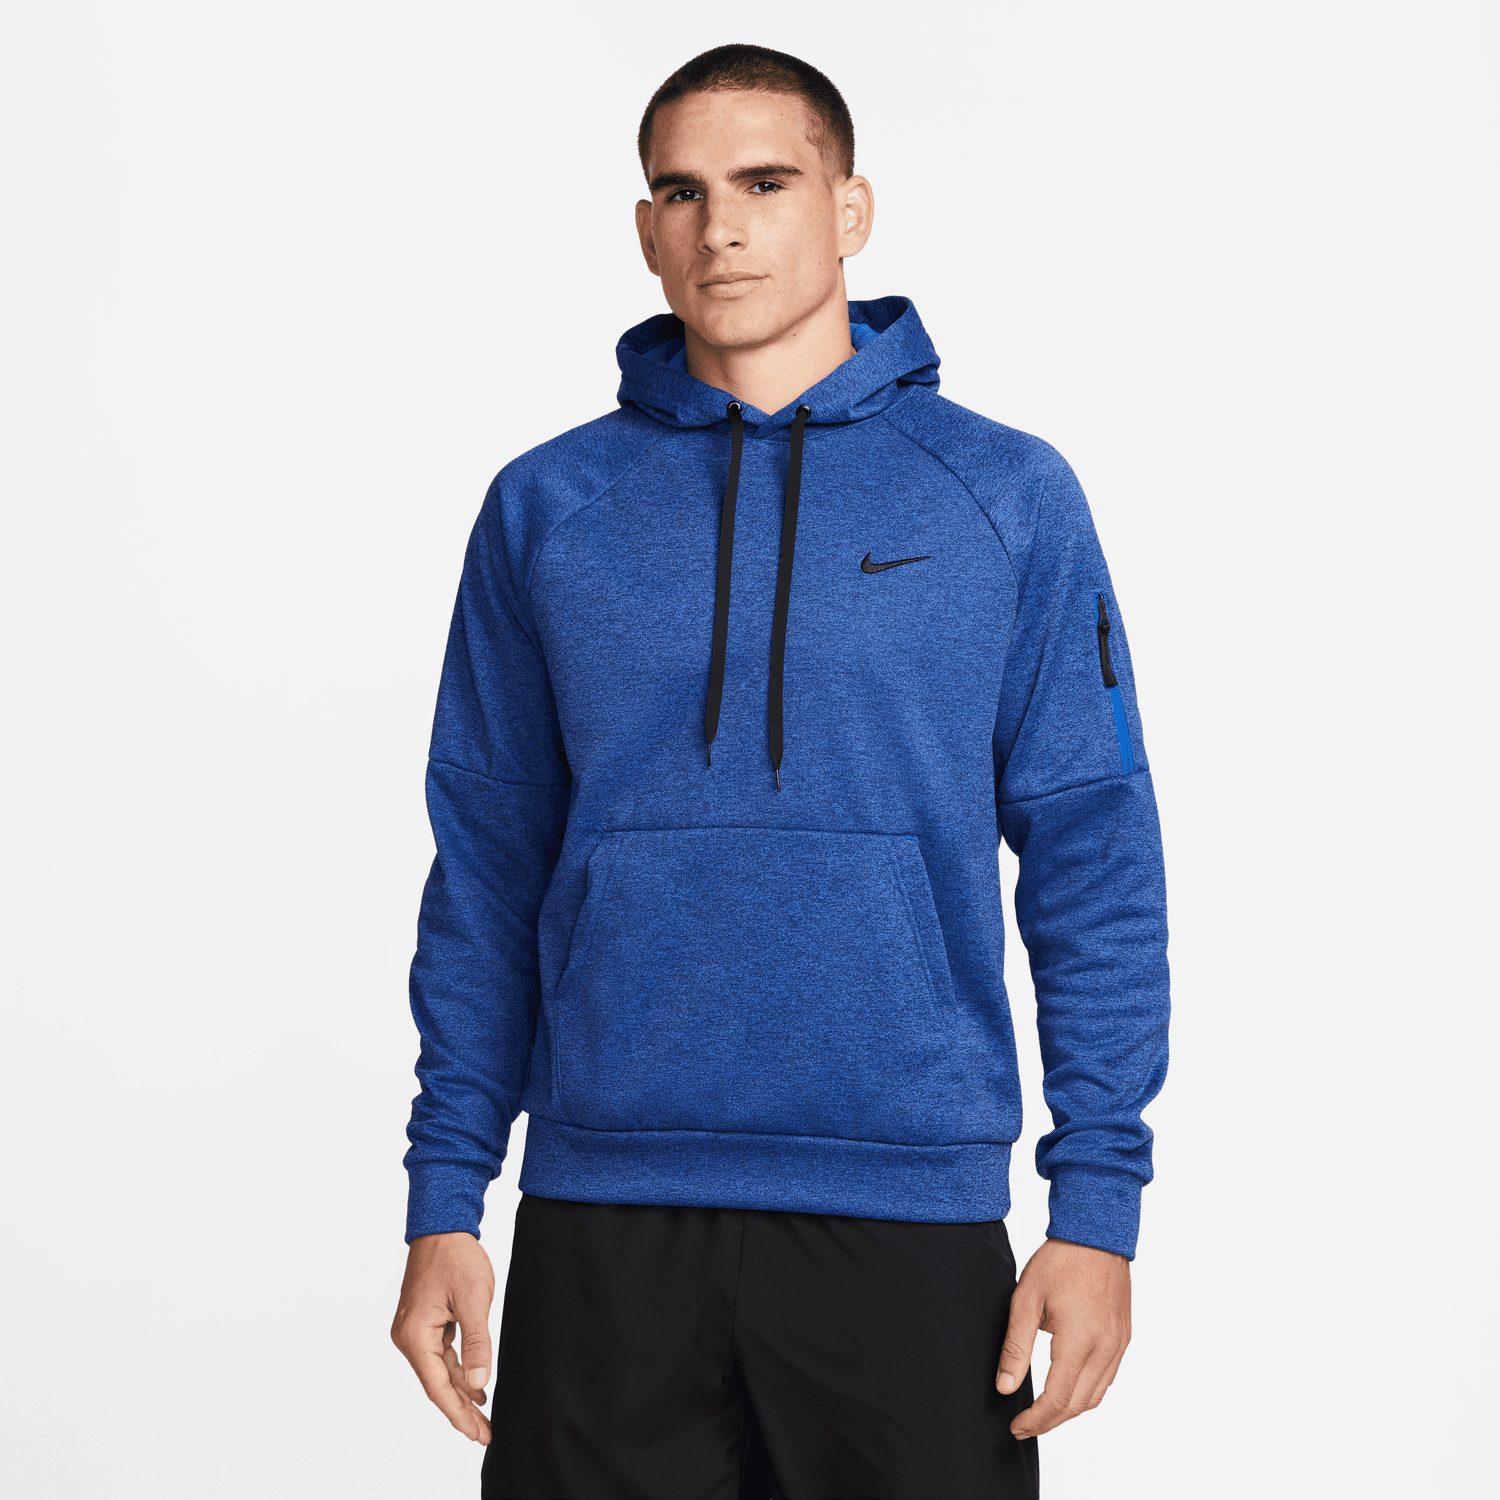 Nike Golf Men's Therma-FIT Hooded Fitness Pullover DQ4834 Blue Void / Heather / Game Royal / Black 492 M 